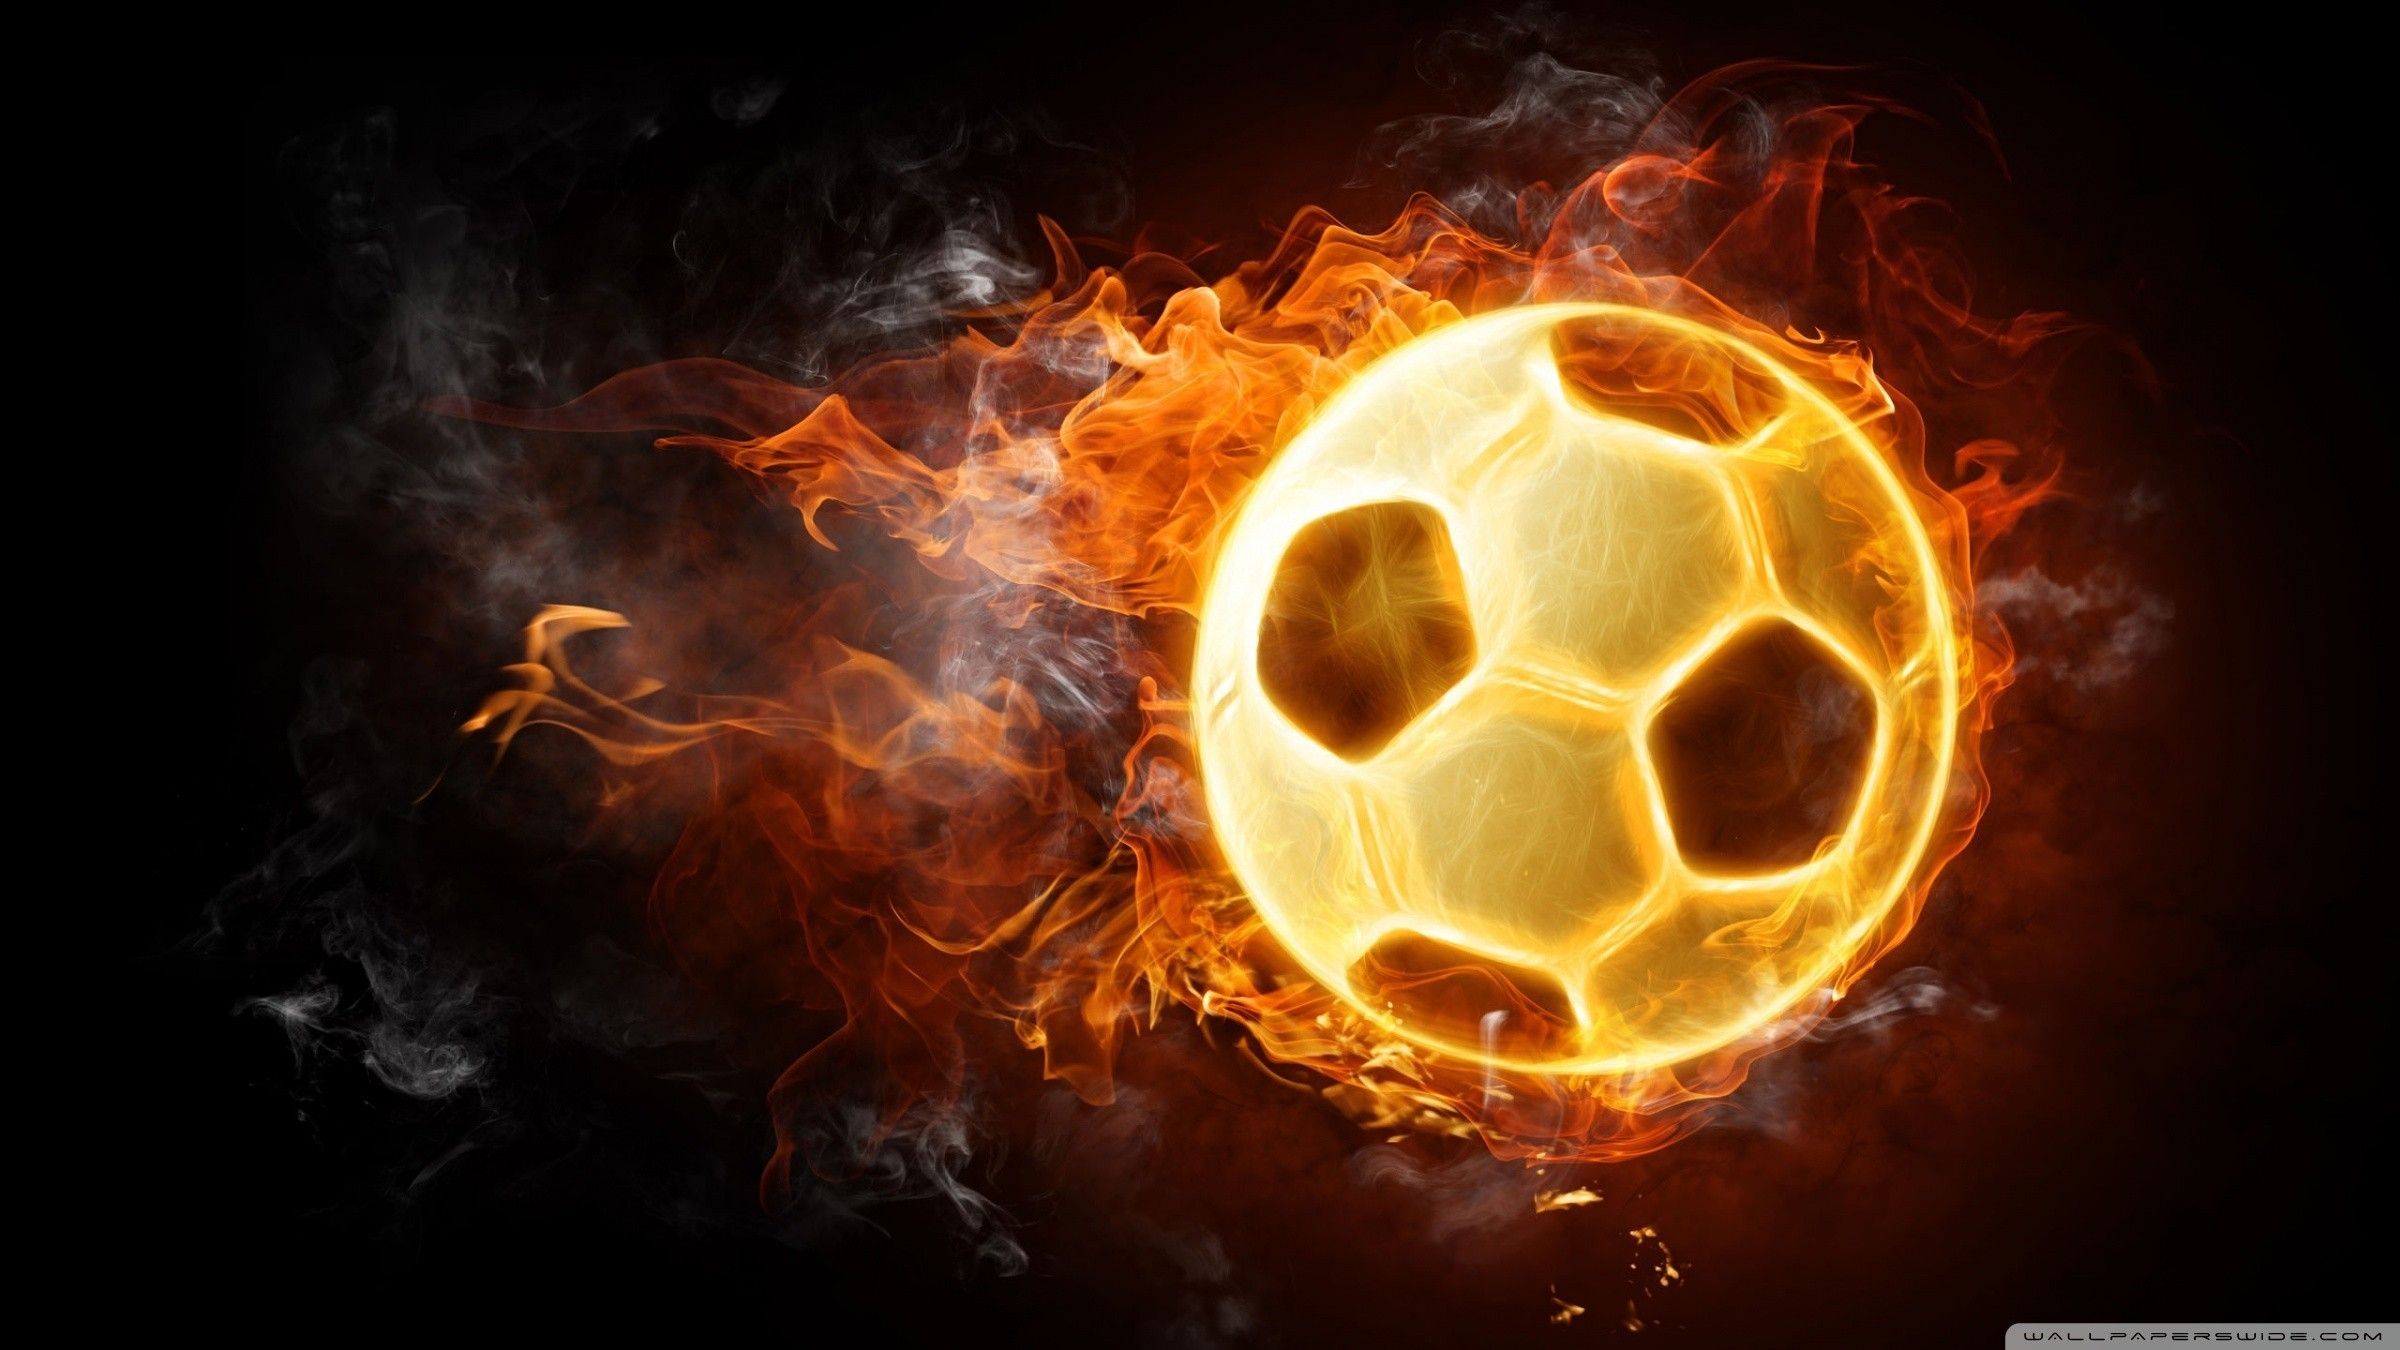 Cool Soccer Wallpapers